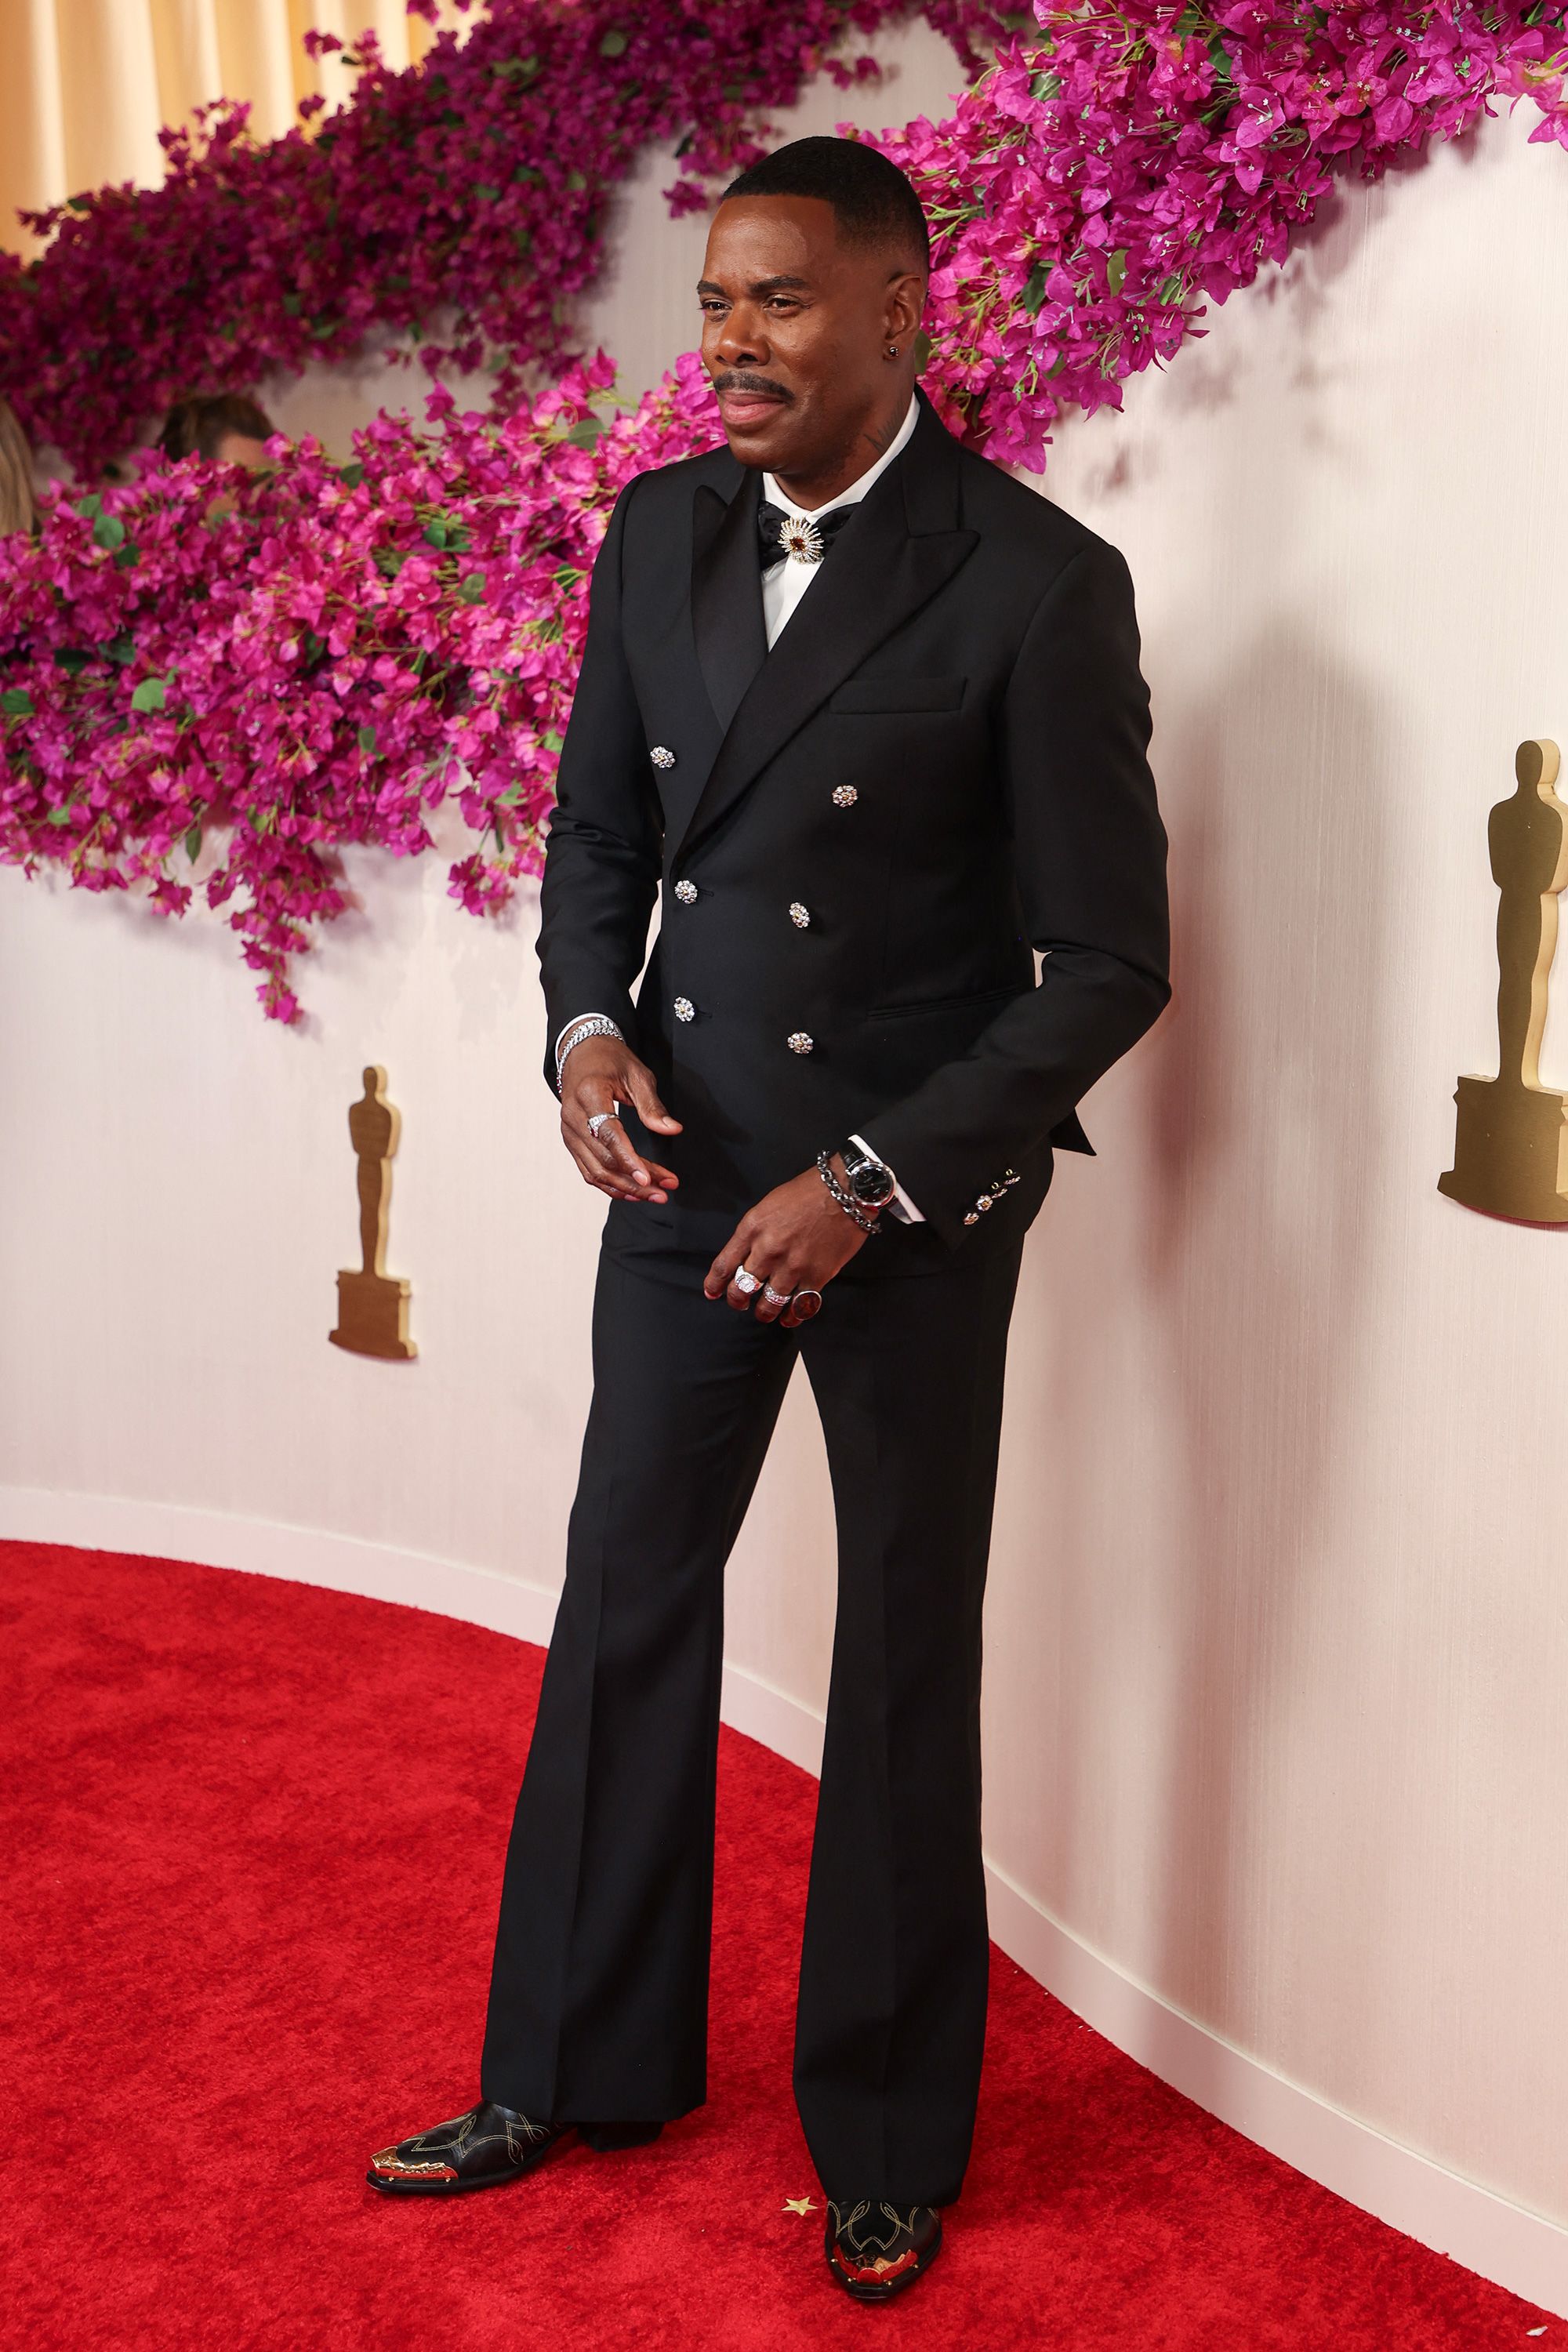 Best Actor nominee Colman Domingo wore a black Louis Vuitton double breasted suit with statement bowtie and jewelry by David Yurman. 'I wanted to just shine like a diamond,' he told Laverne Cox during E’s red carpet coverage.